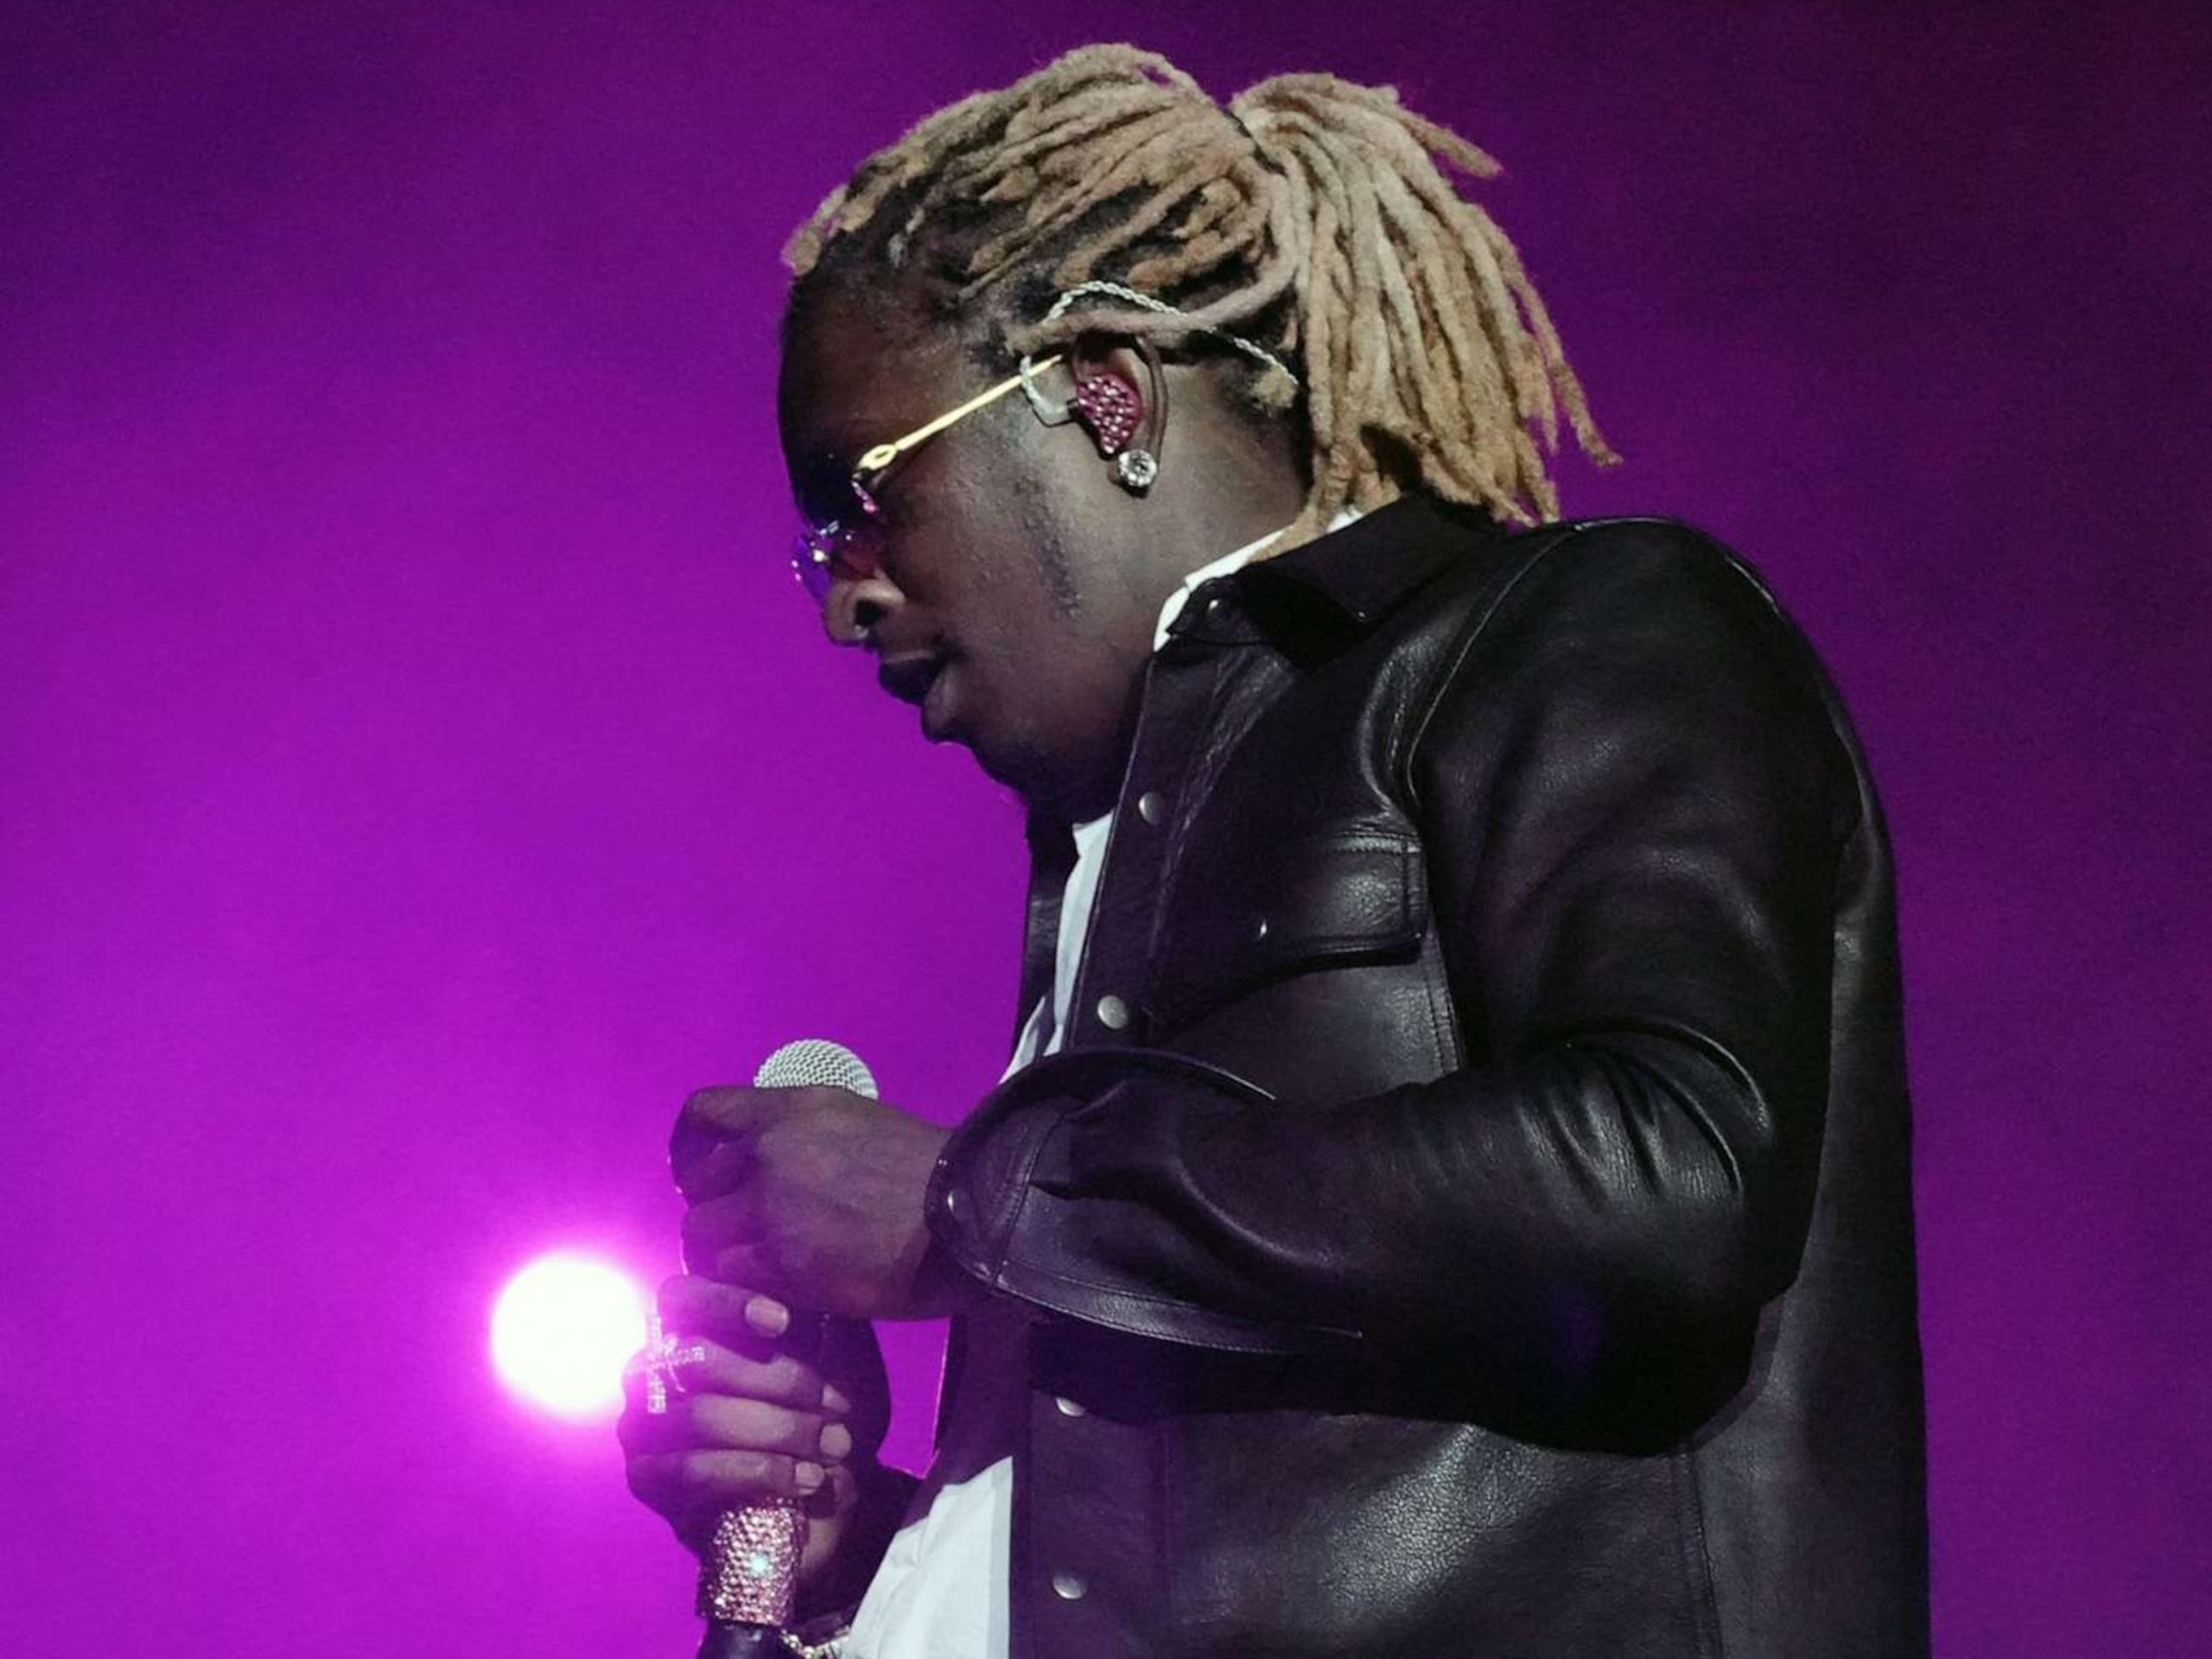 Court Allows Rap Lyrics to be Used as Evidence in Young Thug Trial